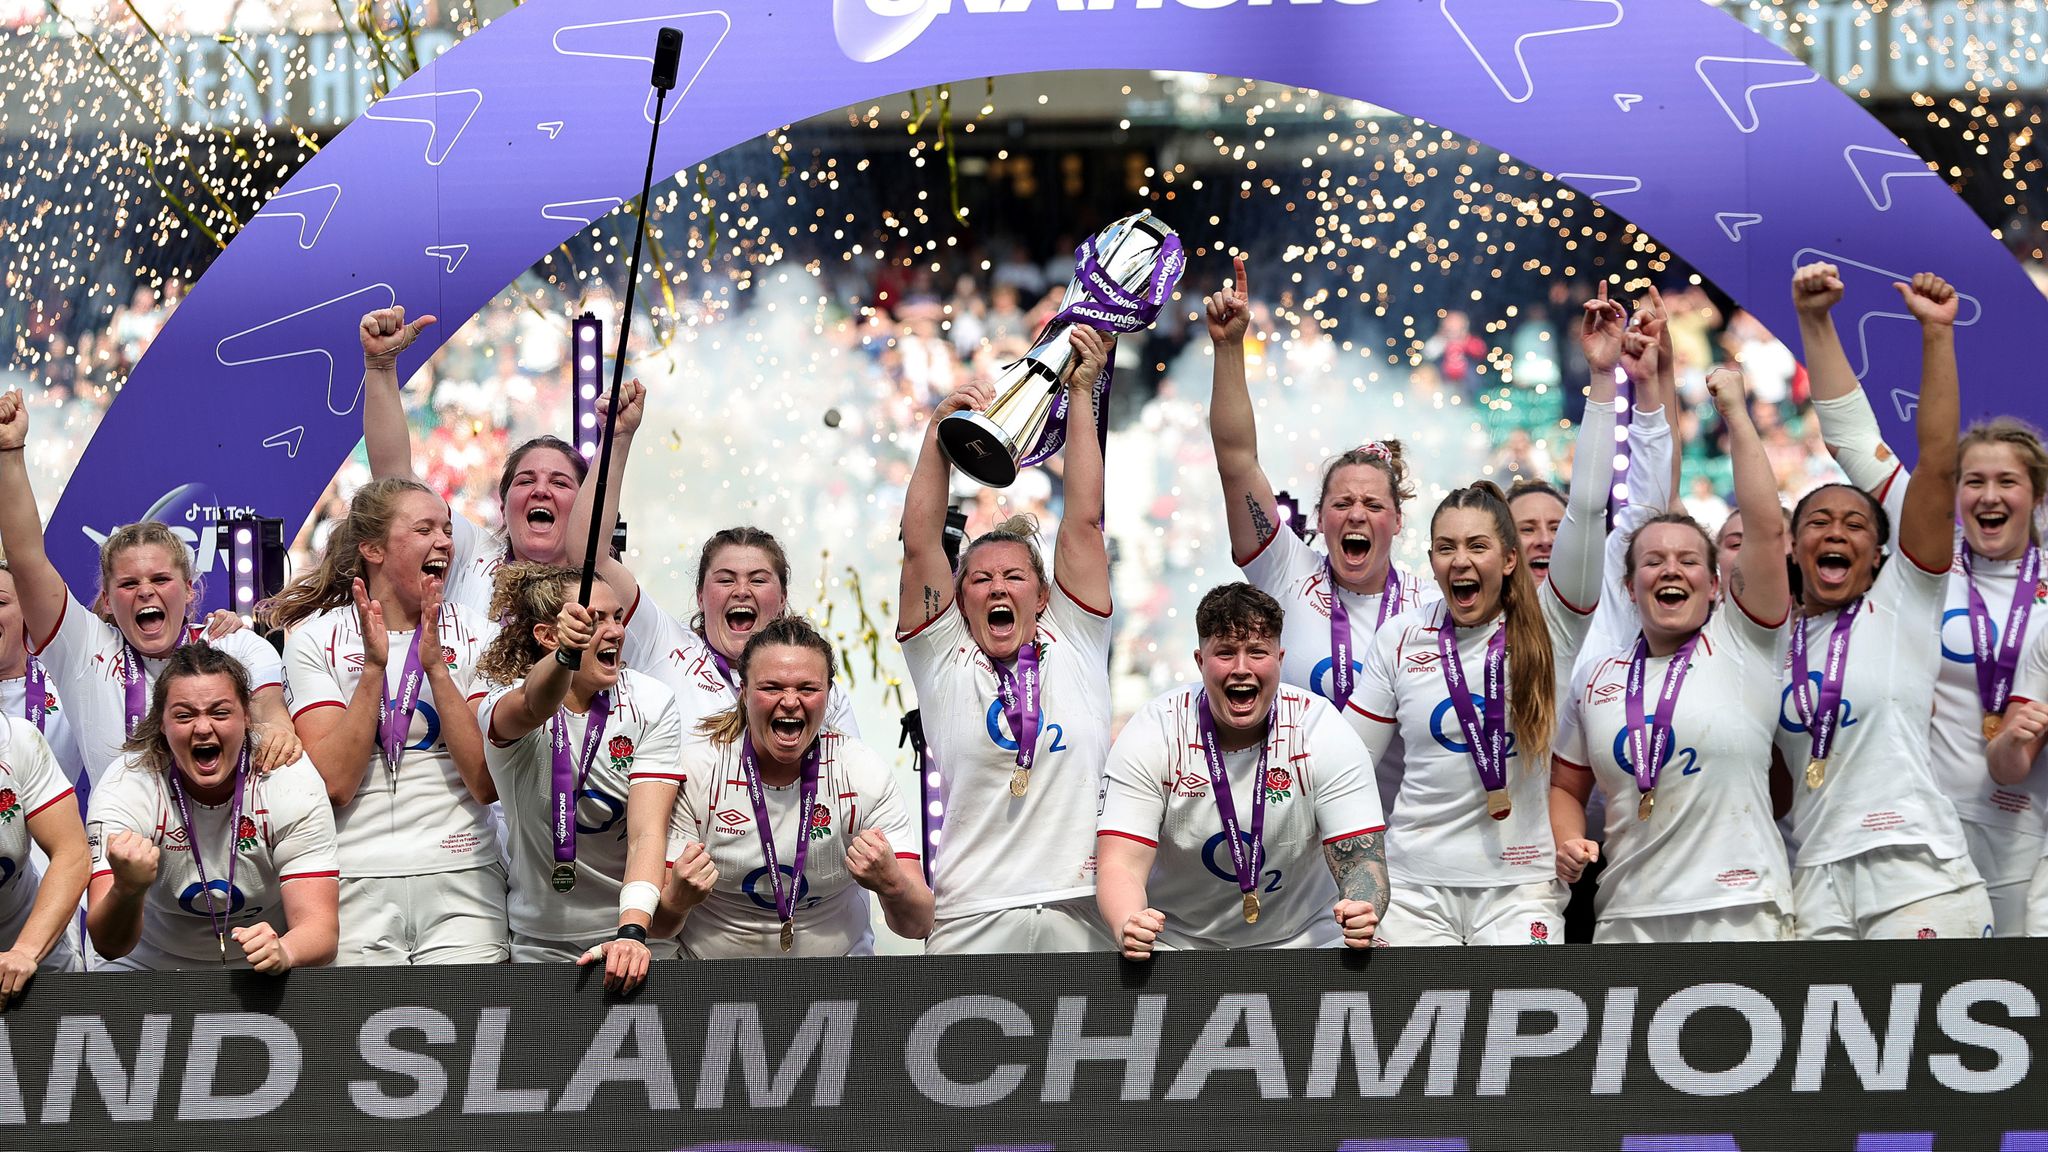 Women's Six Nations 2024 Fixtures, schedule, kickoff times for